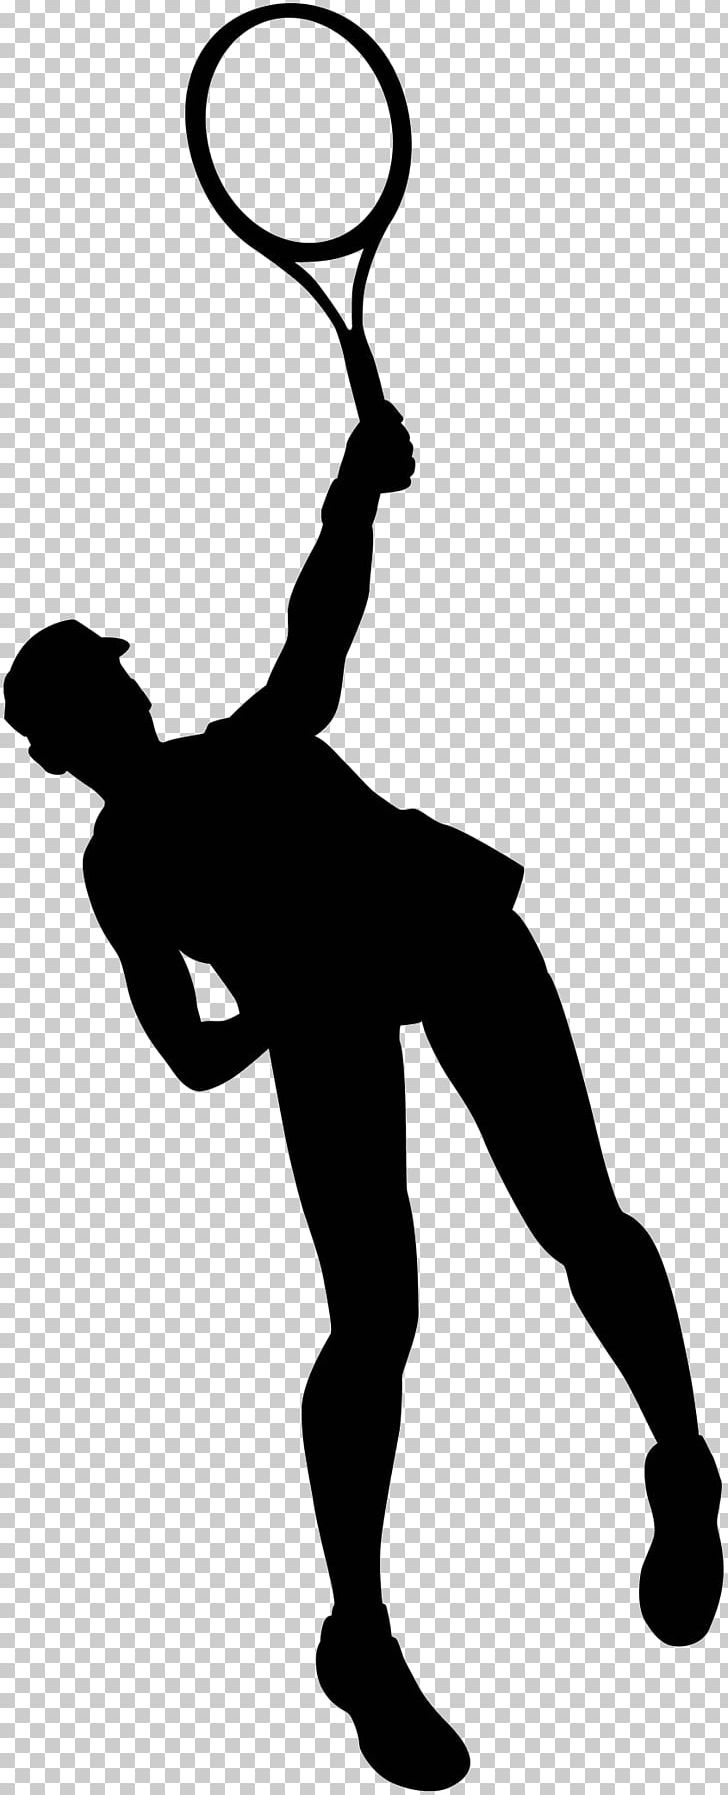 Tennis Centre Athletics Field Sport Tennis Player PNG, Clipart, Artwork, Athletics Field, Black, Black And White, Fictional Character Free PNG Download